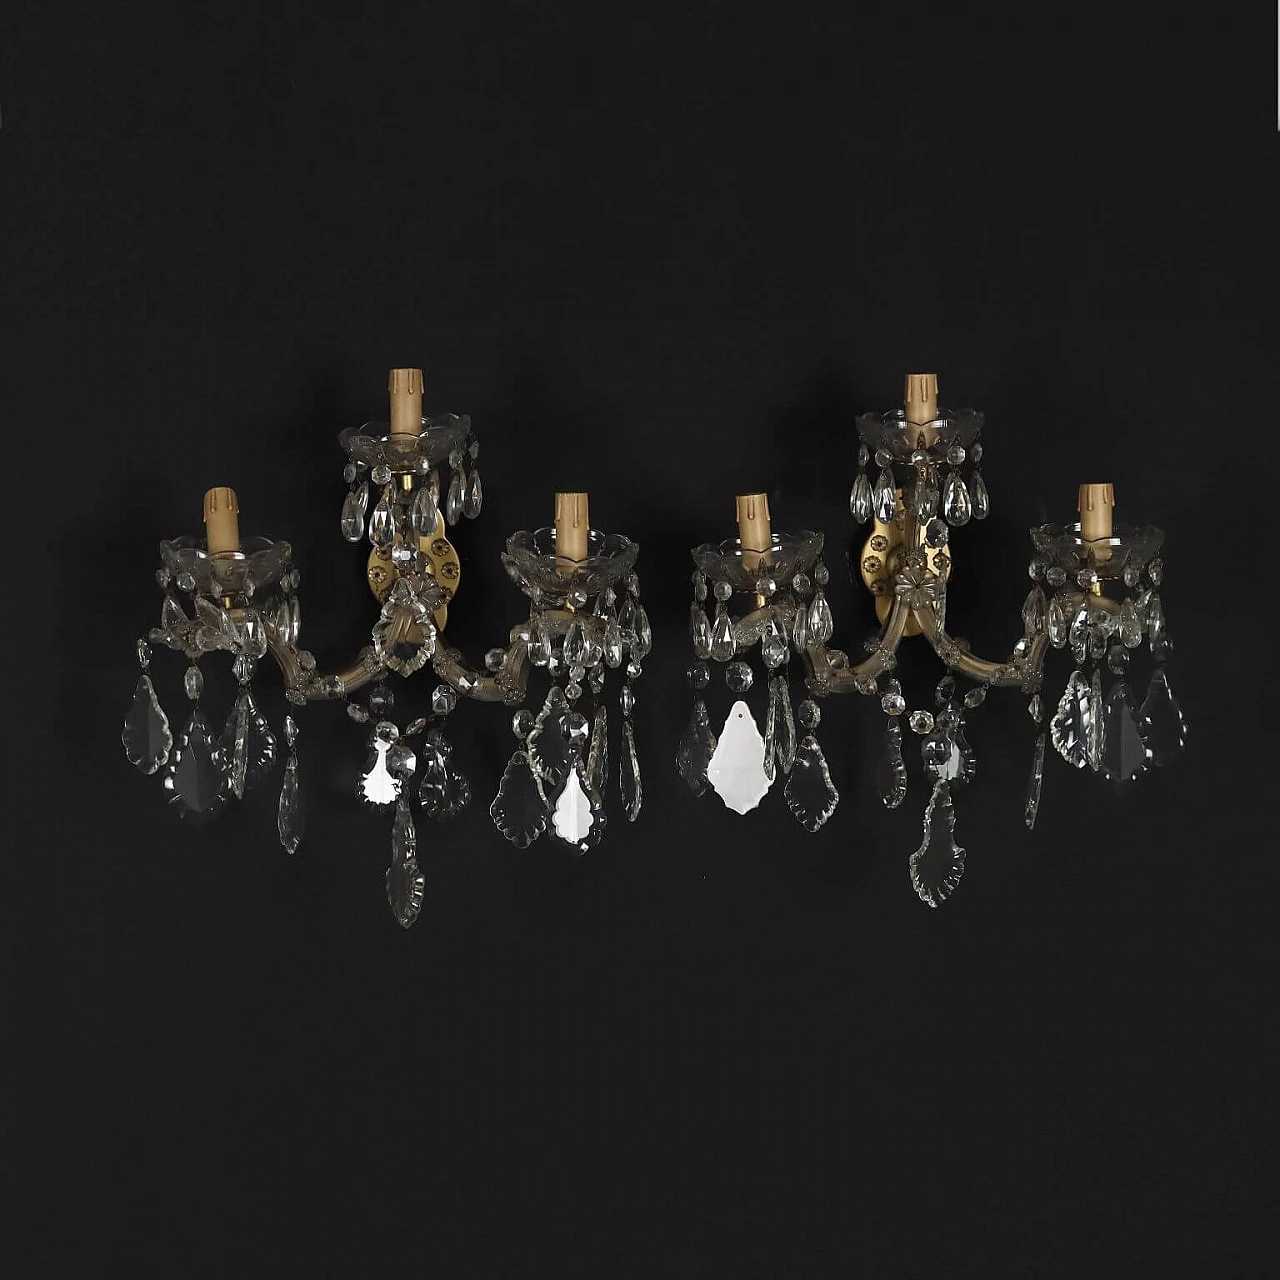 Pair of three-light sconces in Maria Teresa style 1